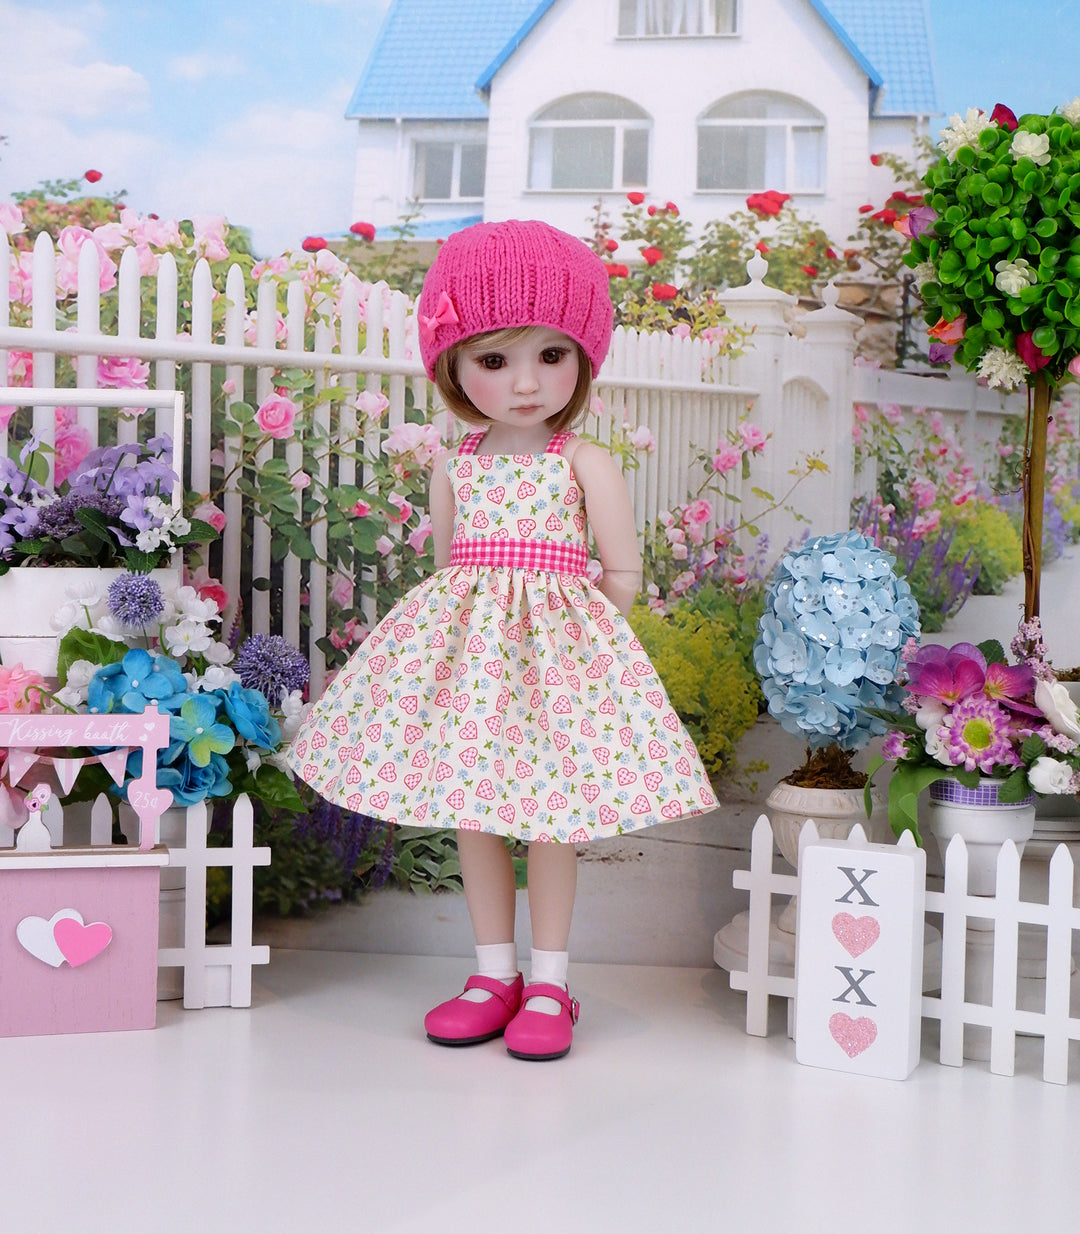 Quilted Hearts - dress and sweater with shoes for Ruby Red Fashion Friends doll